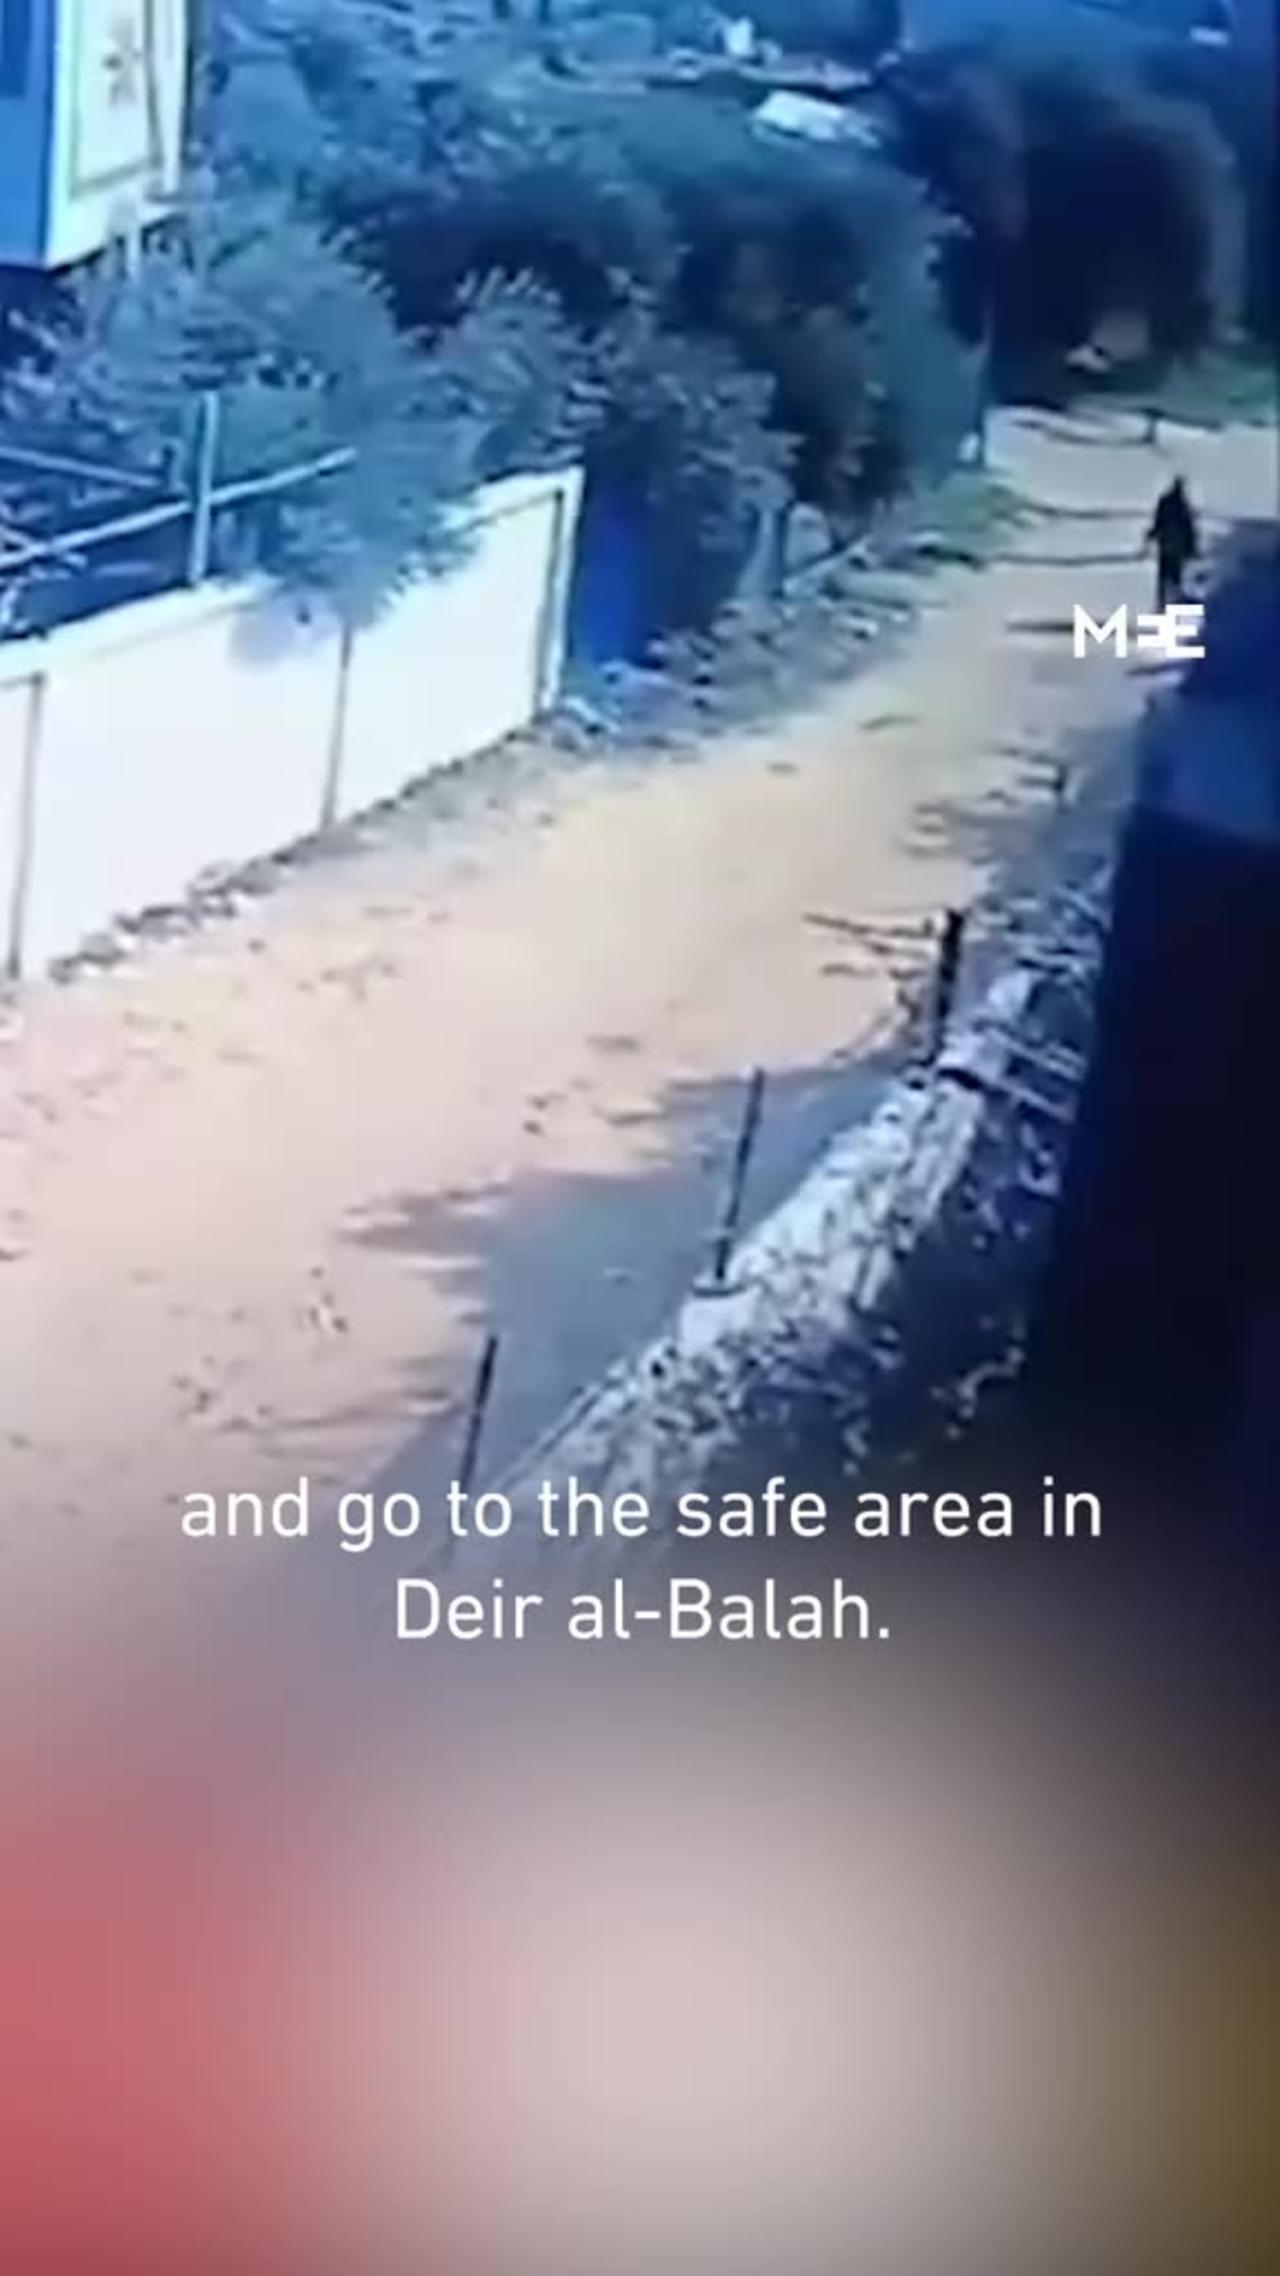 an Israeli strike on Palestinians was filmed on his home security camera.